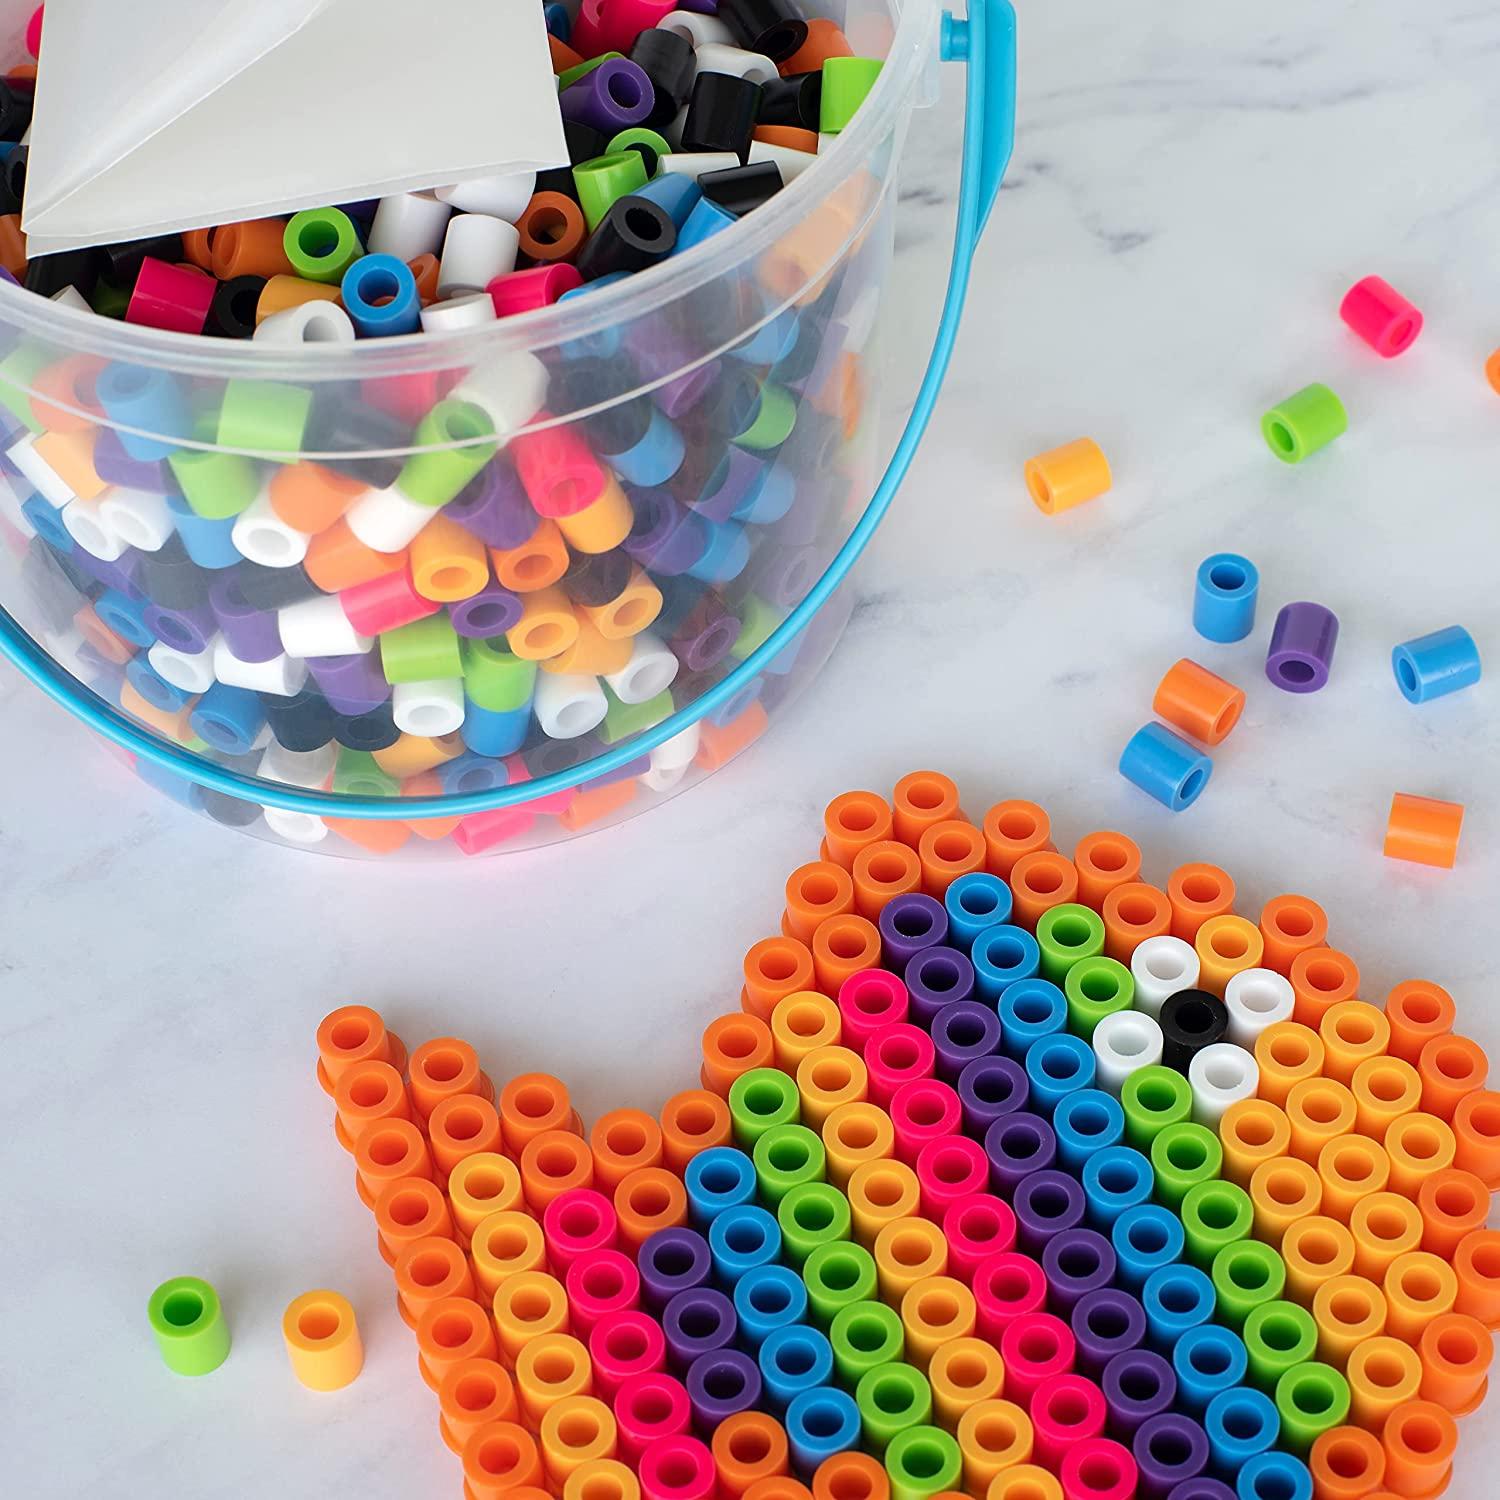 Kids Crafts ASSORTED FOAM BEADS over 150 pcs (2 bags of 75 each)